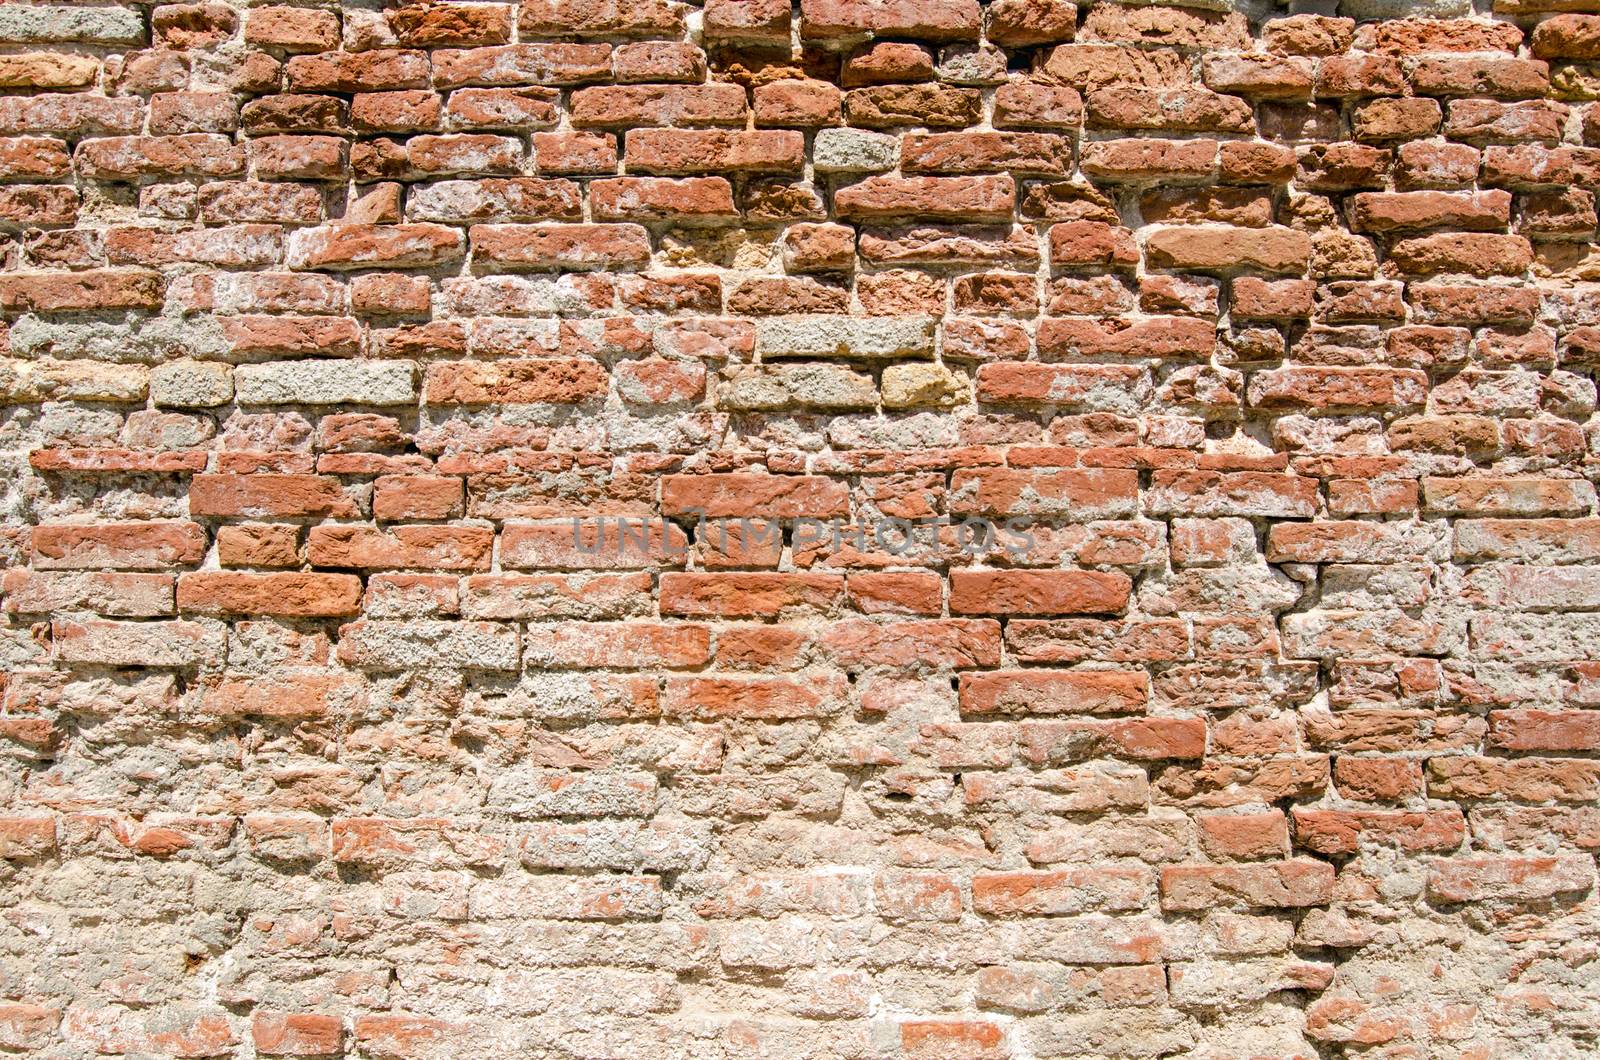 Brick wall with severe weathering and mortar loss on a sunny day in Venice.